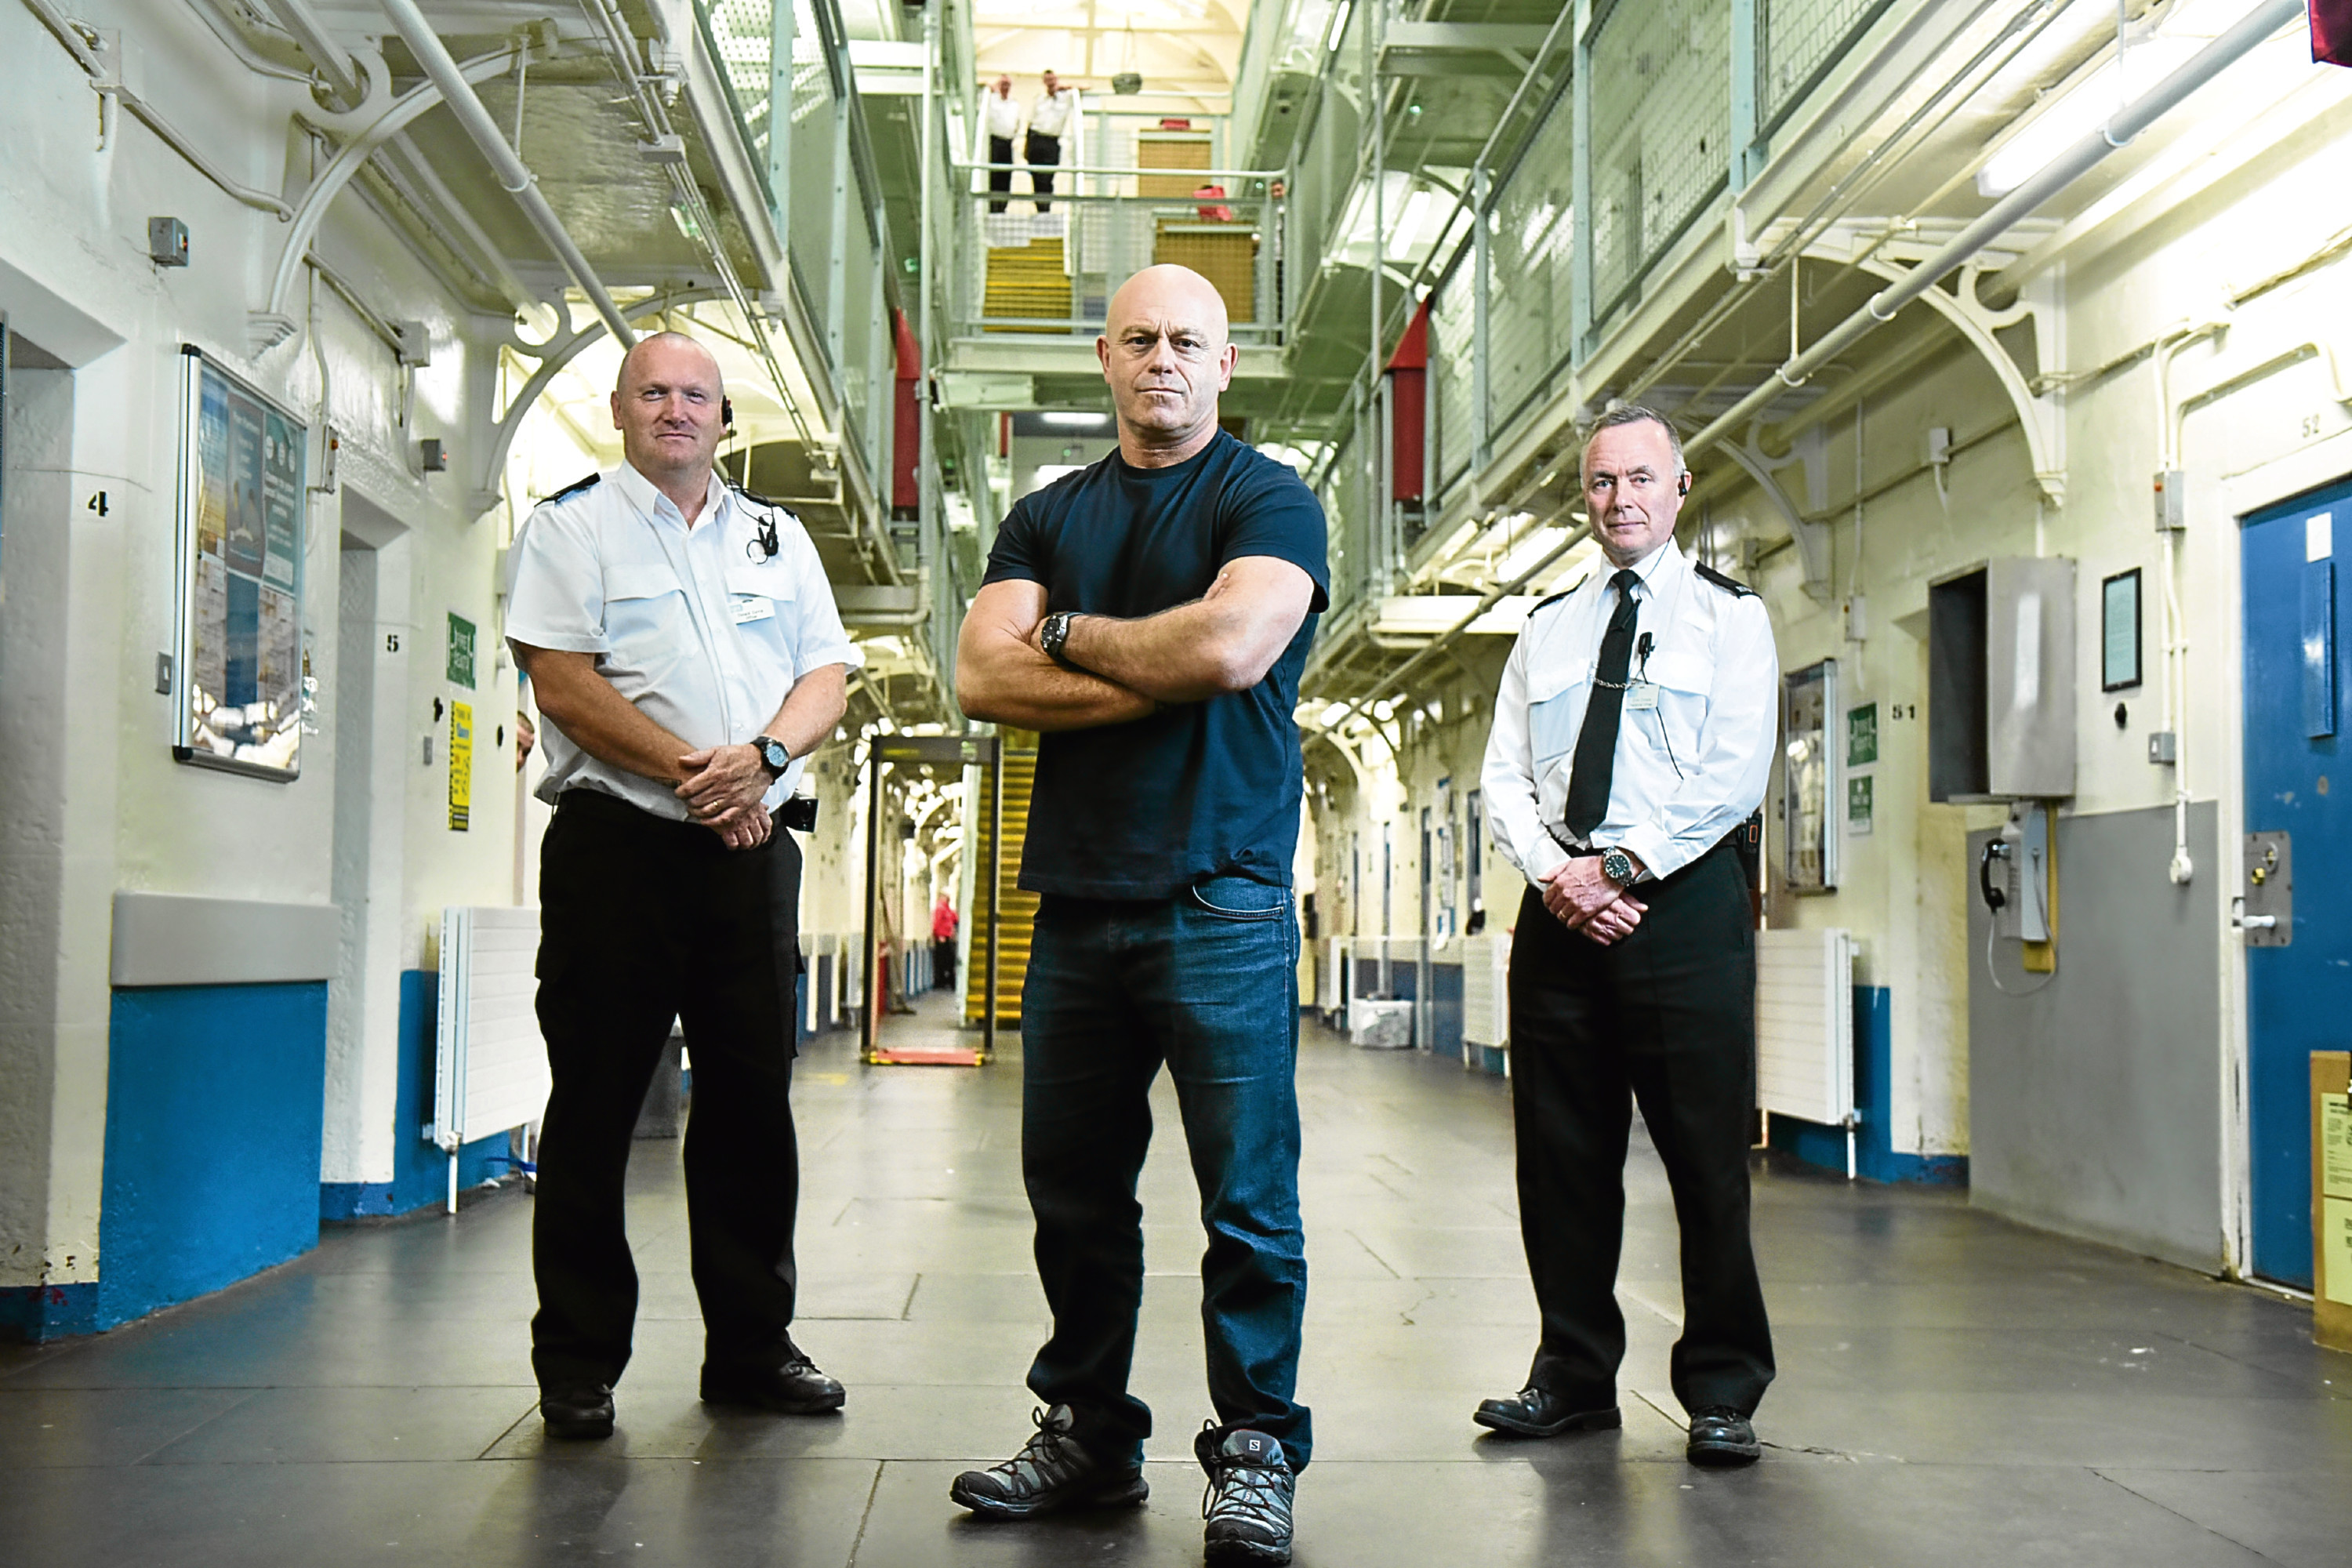 Ross Kemp (centre) flanked by two prison guards in Barlinnie Prison (ITV)